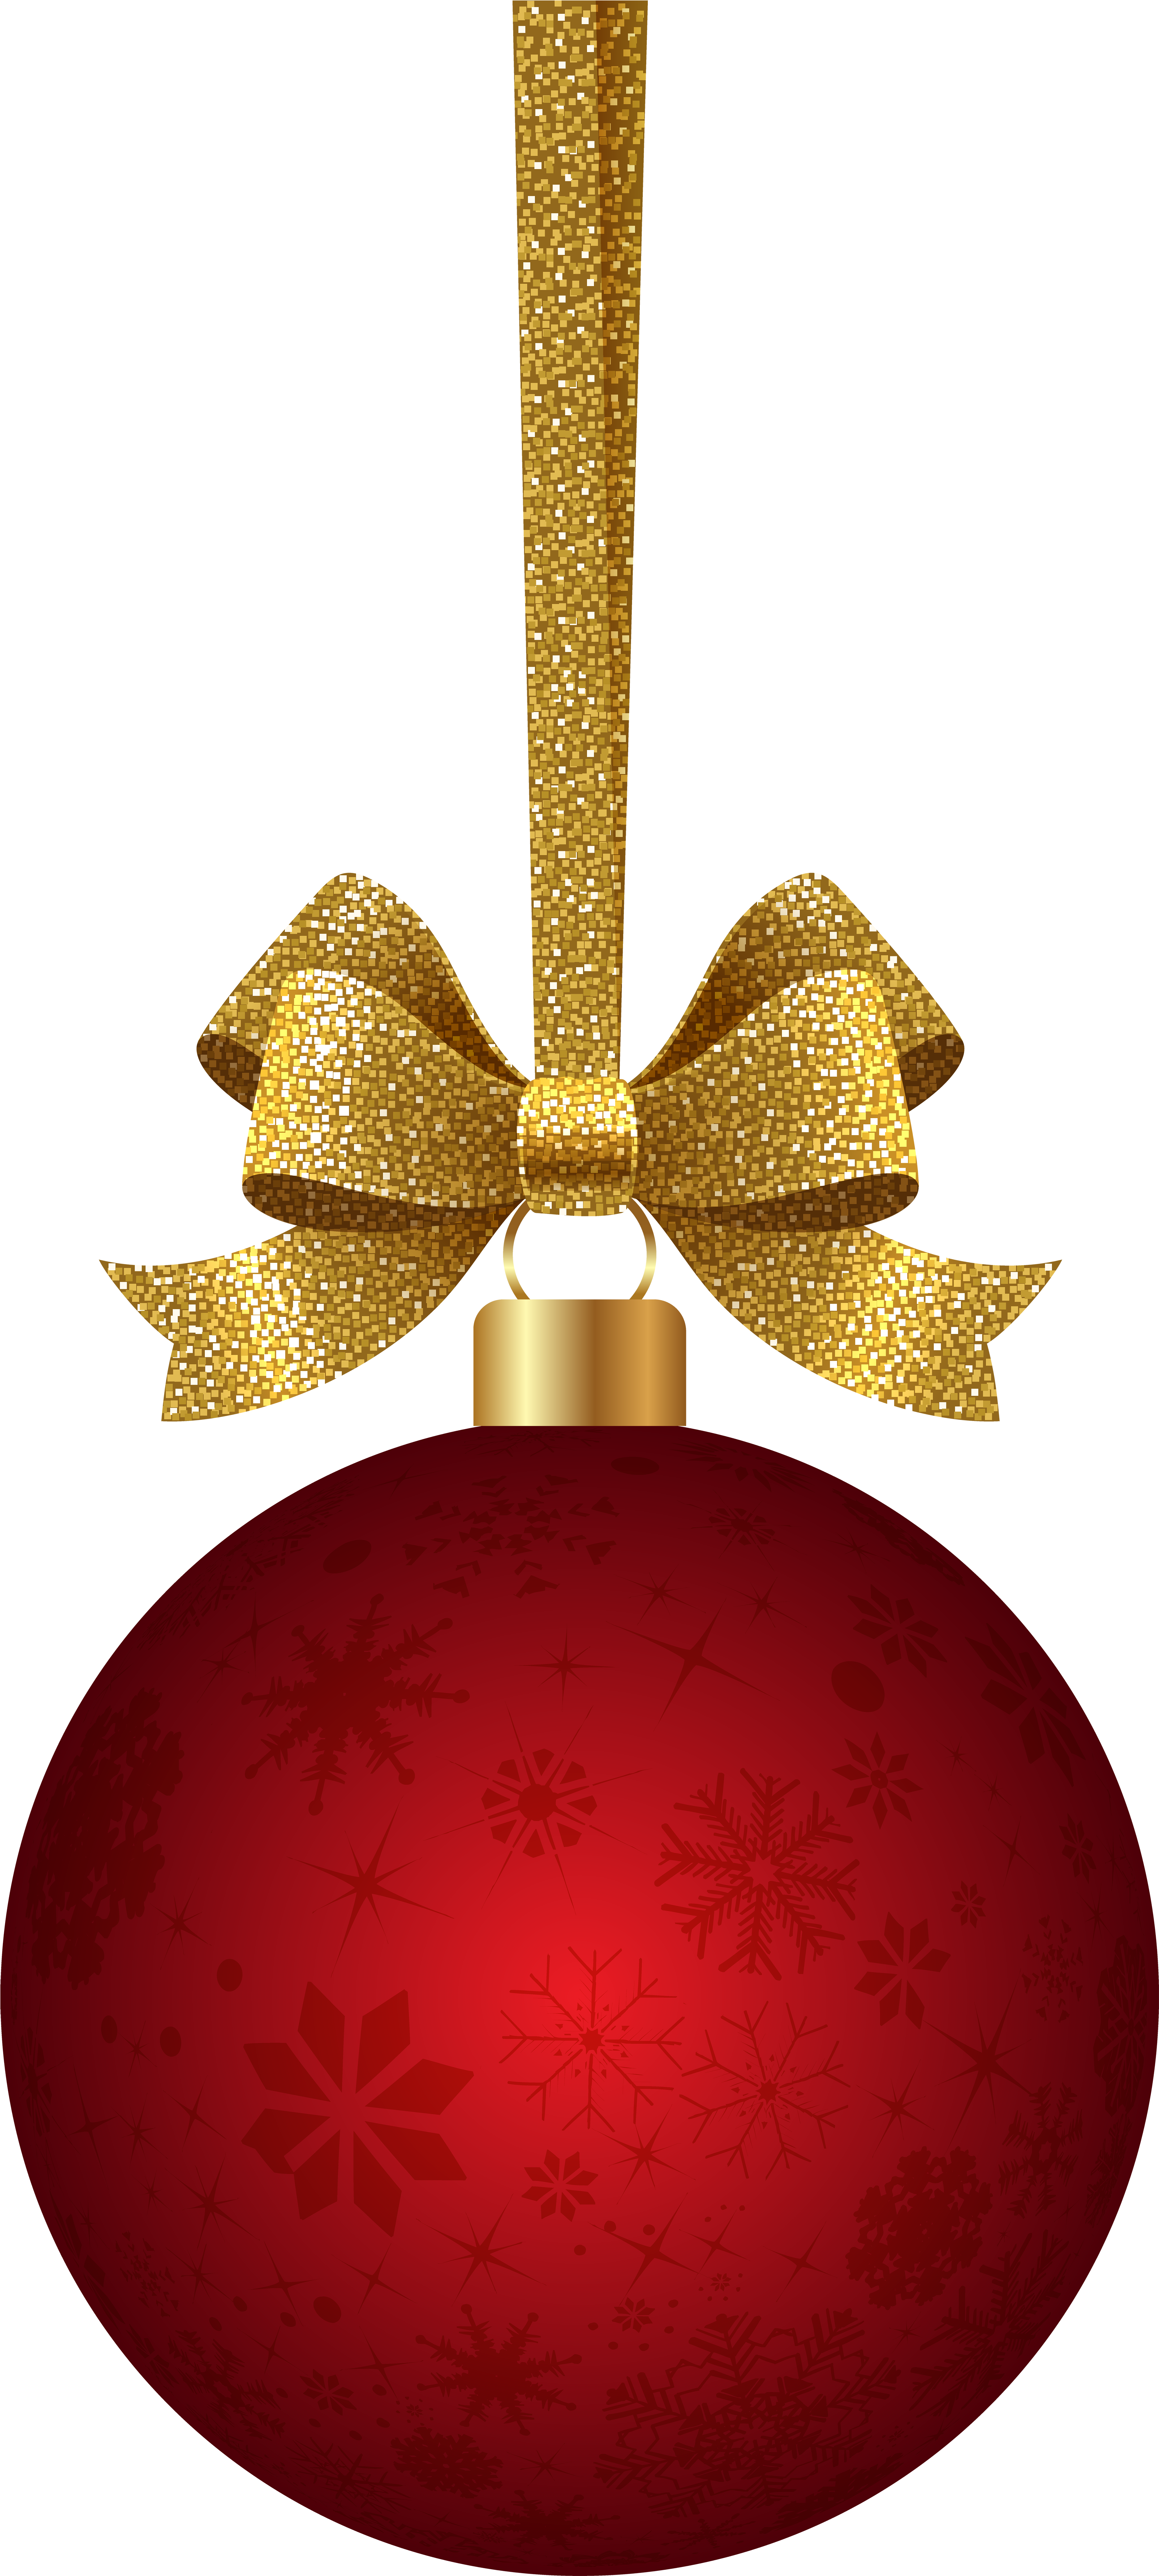 Golden Bow Red Christmas Ball